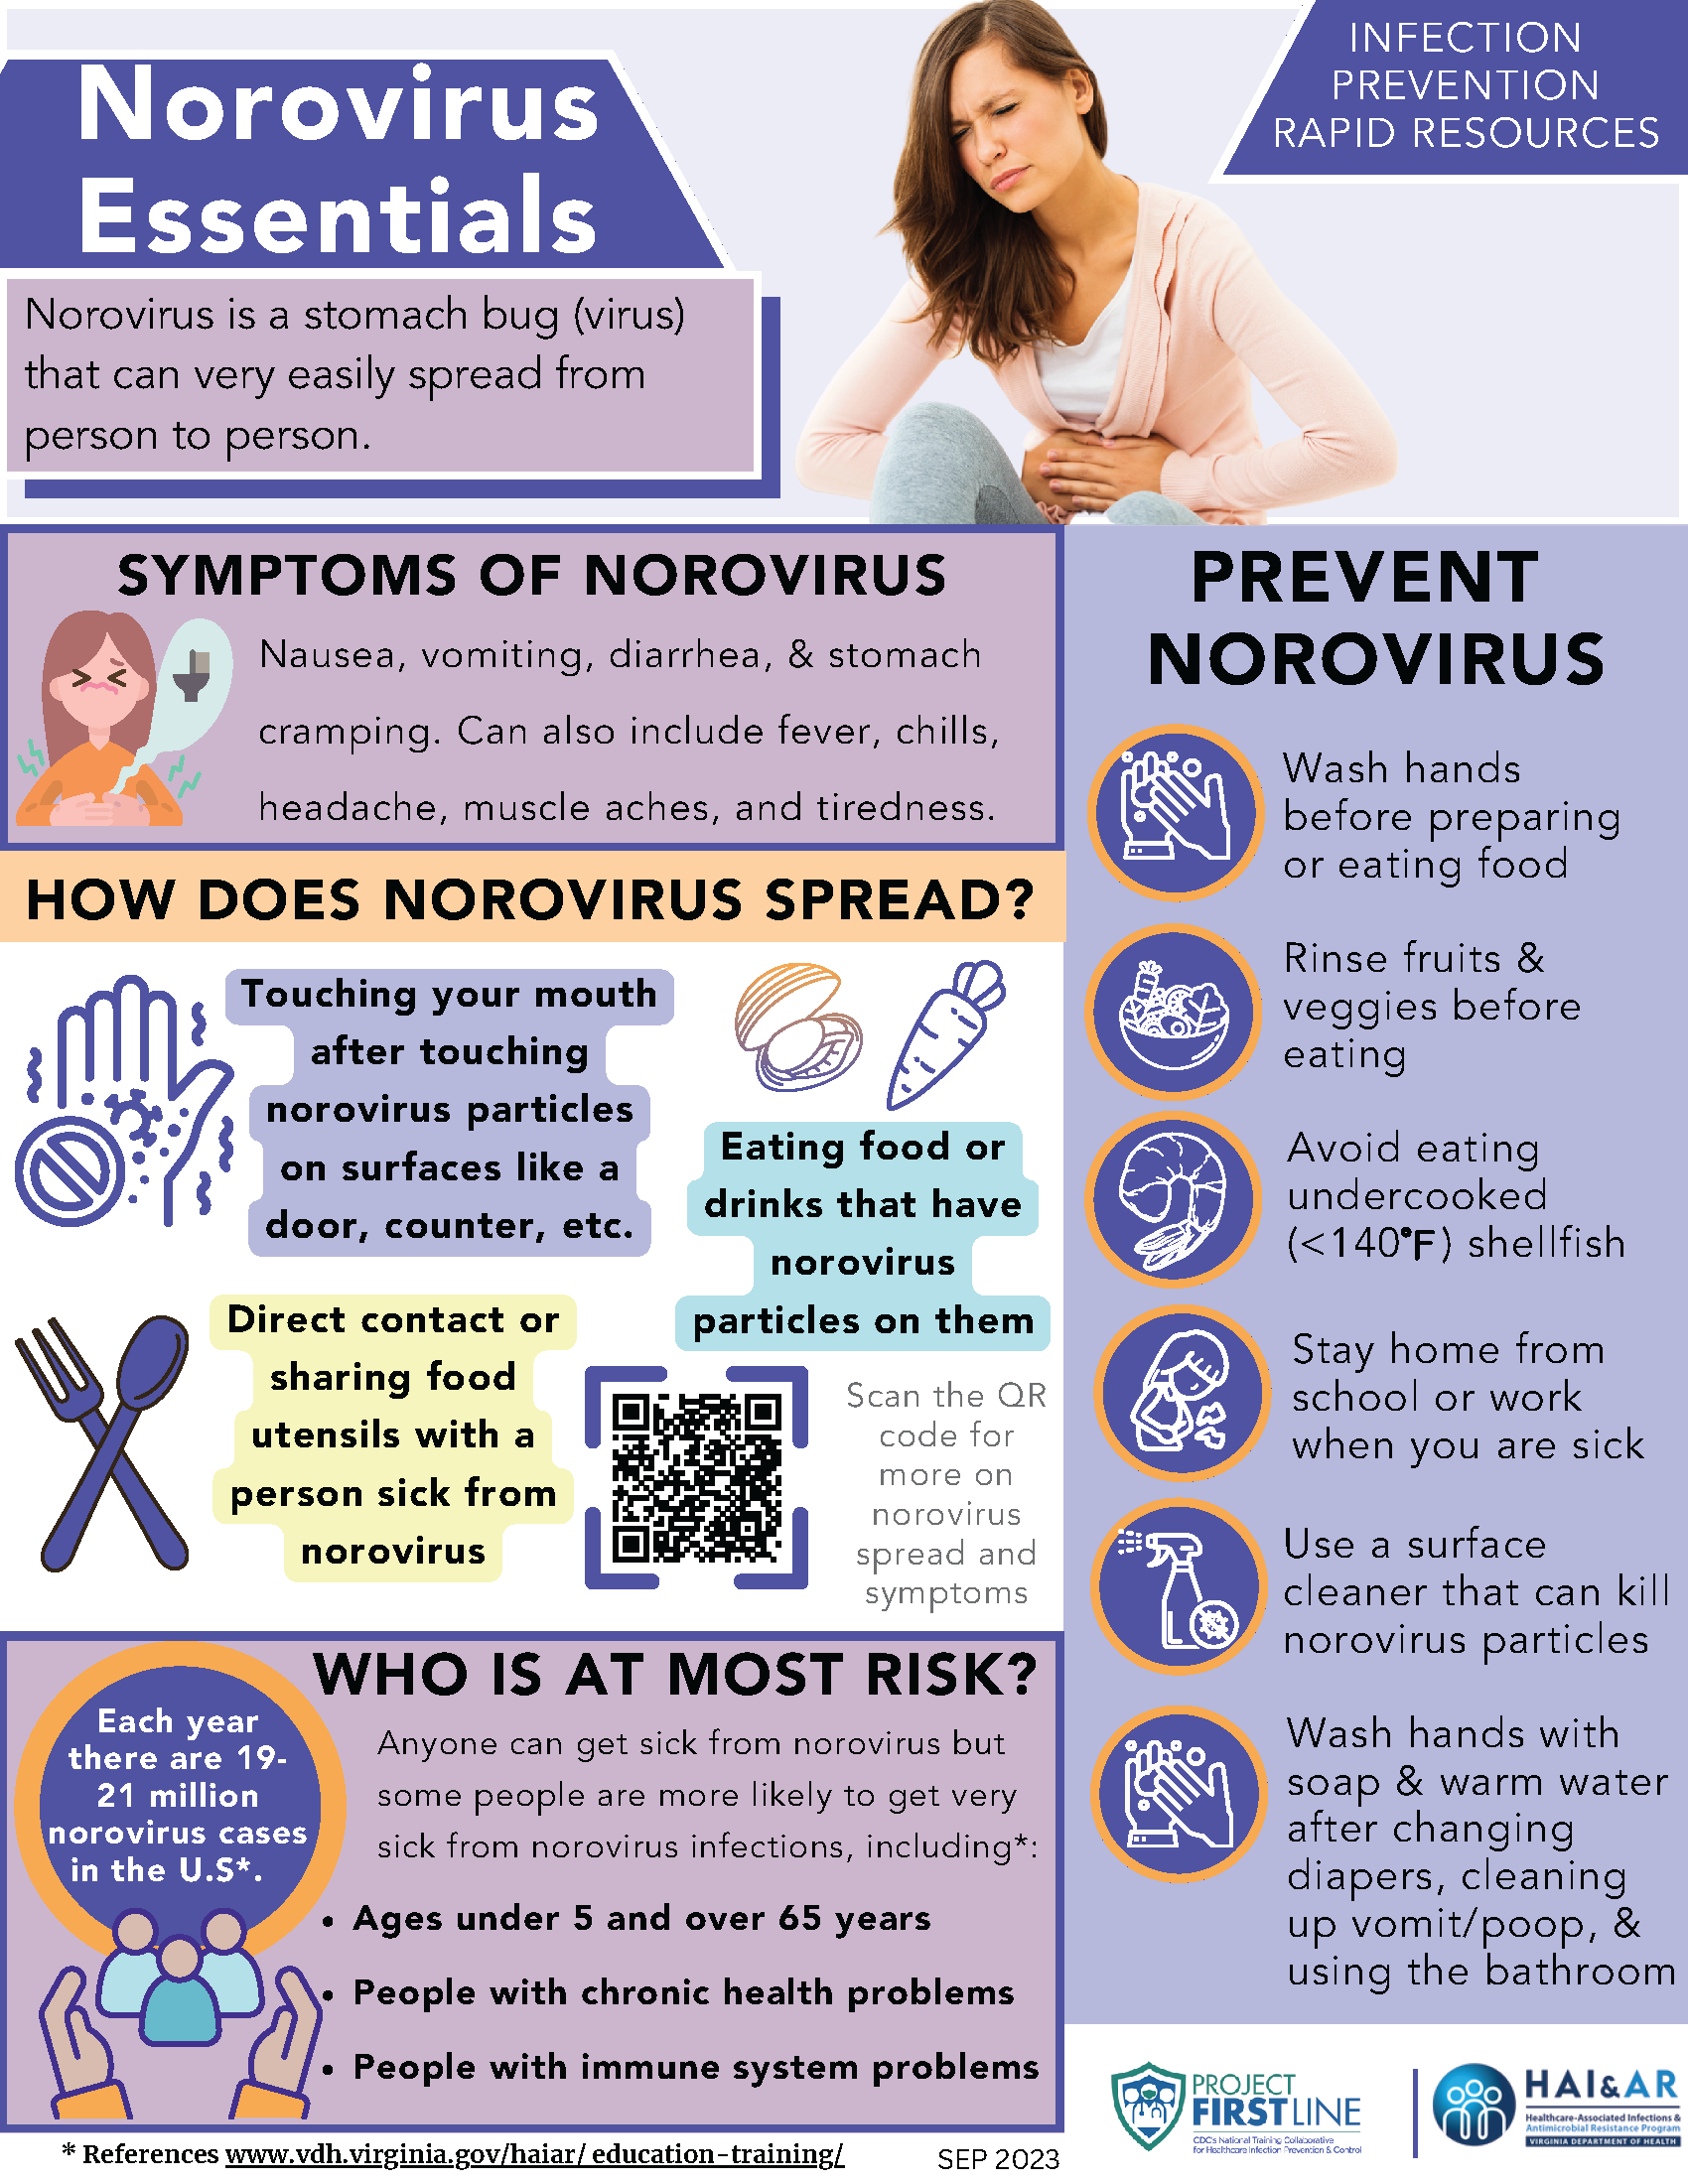 Image of the Norovirus Essentials Informational Graphic